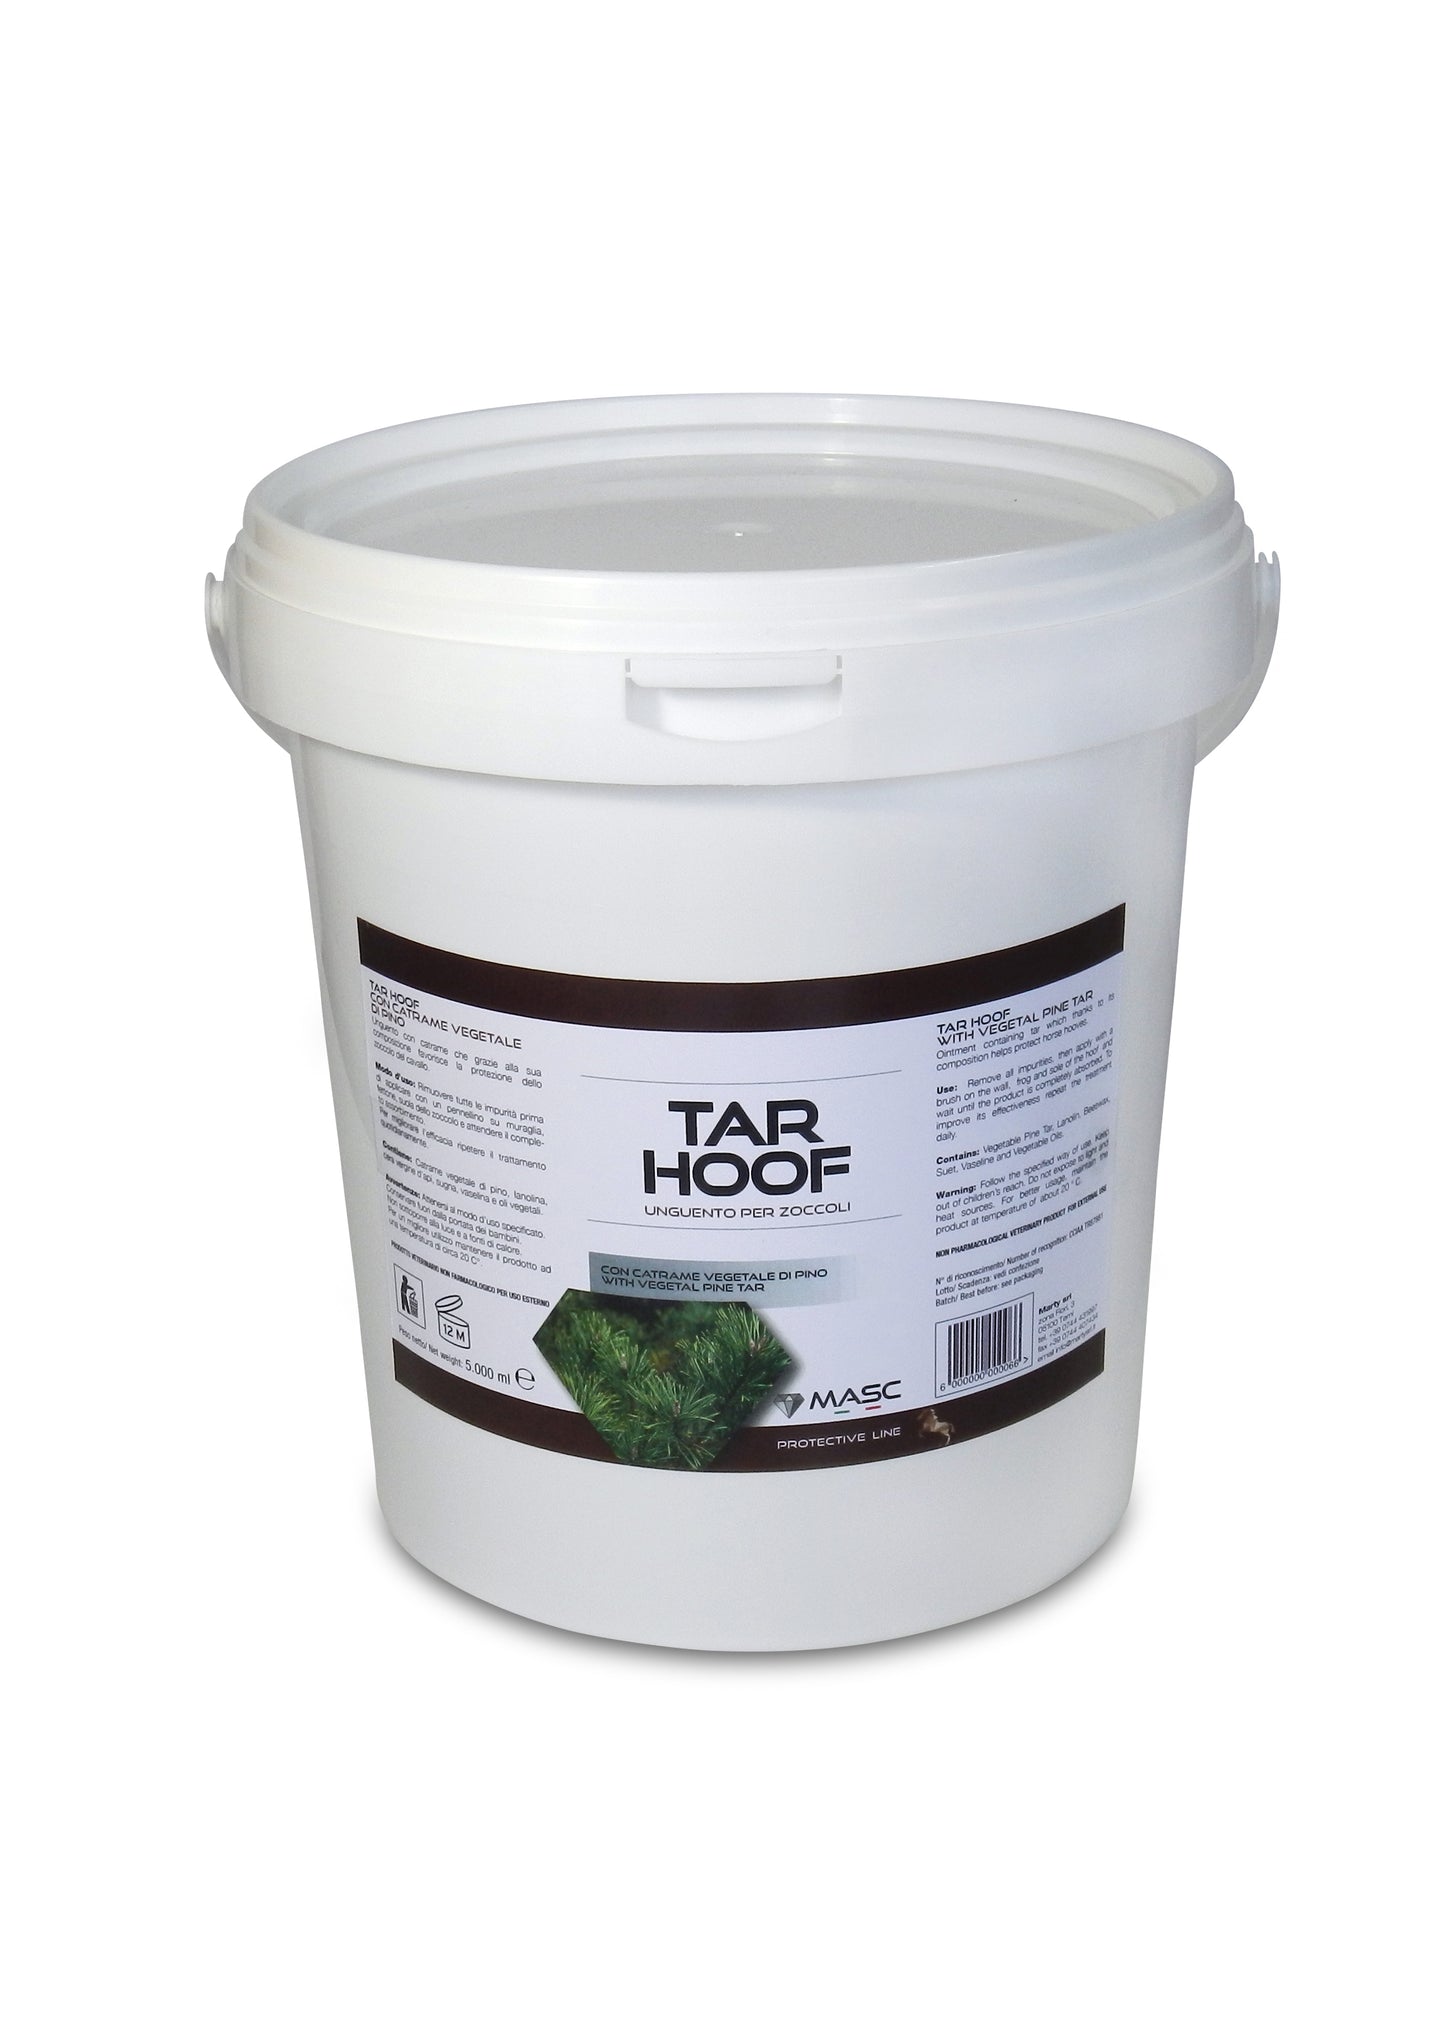 Tar Hoof Ointment | Waterproof and Insulating Treatment for Horse Hooves